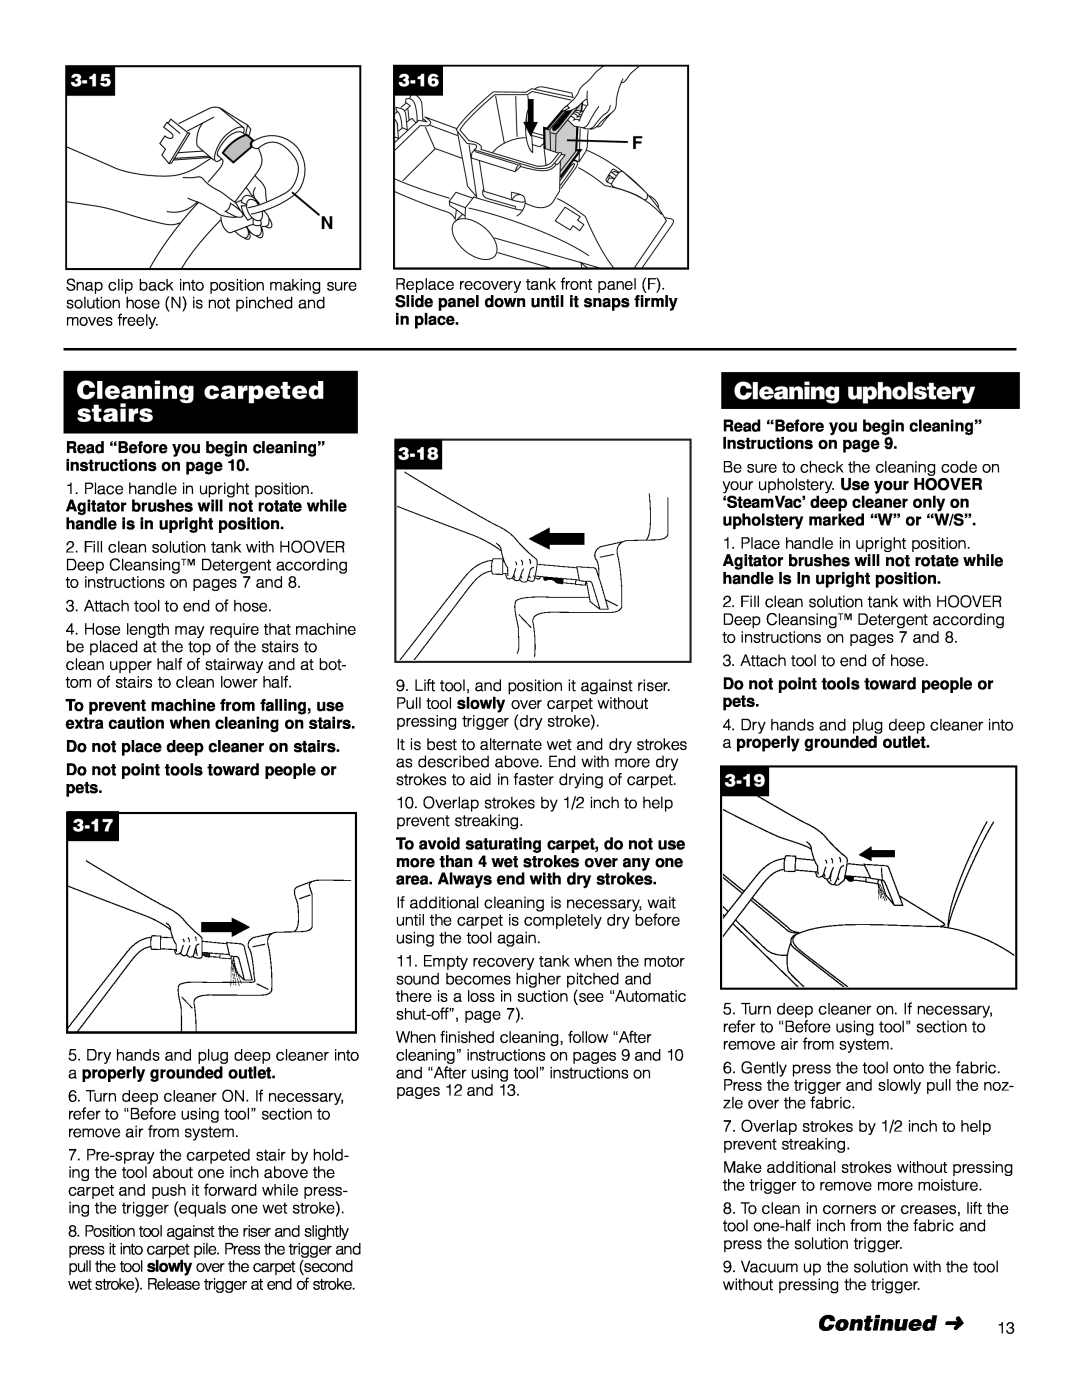 Hoover F5906900 owner manual Cleaning carpeted stairs, Continued, Cleaning upholstery, 3-15, 3-16, 3-17, 3-18, 3-19 